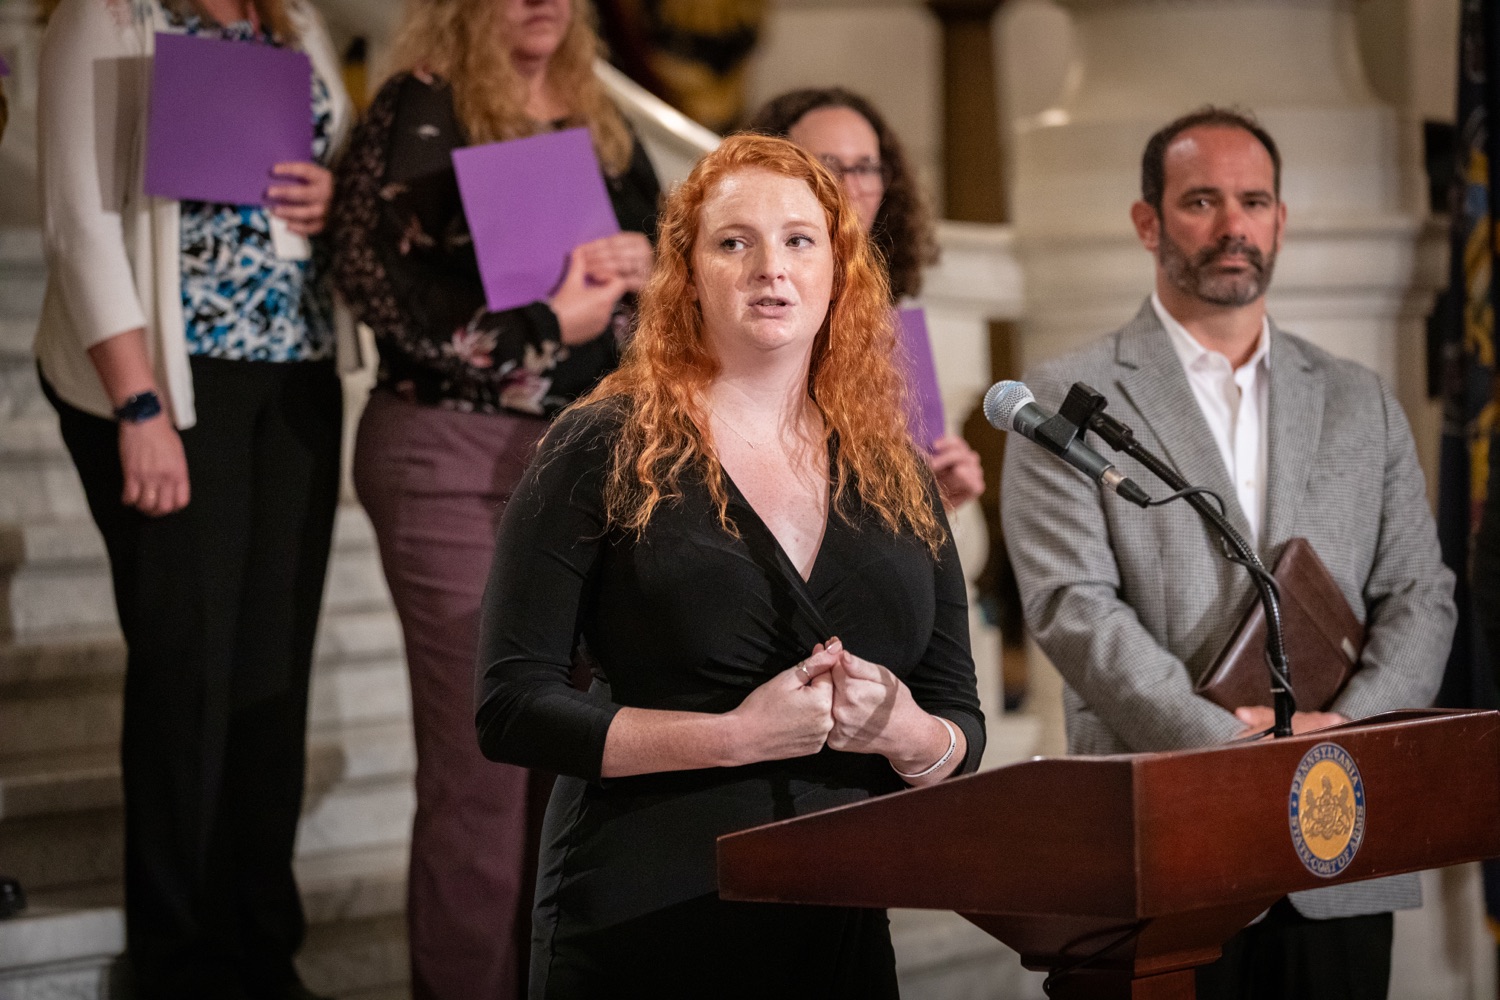 Hannah Metzger, member of Prevent Suicide PA, speaks at Pennsylvanias Suicide Prevention Month Press Conference at the State Capital in Harrisburg, PA.<br><a href="https://filesource.amperwave.net/commonwealthofpa/photo/23696_dhs_suicidePrevention-28.jpg" target="_blank">⇣ Download Photo</a>